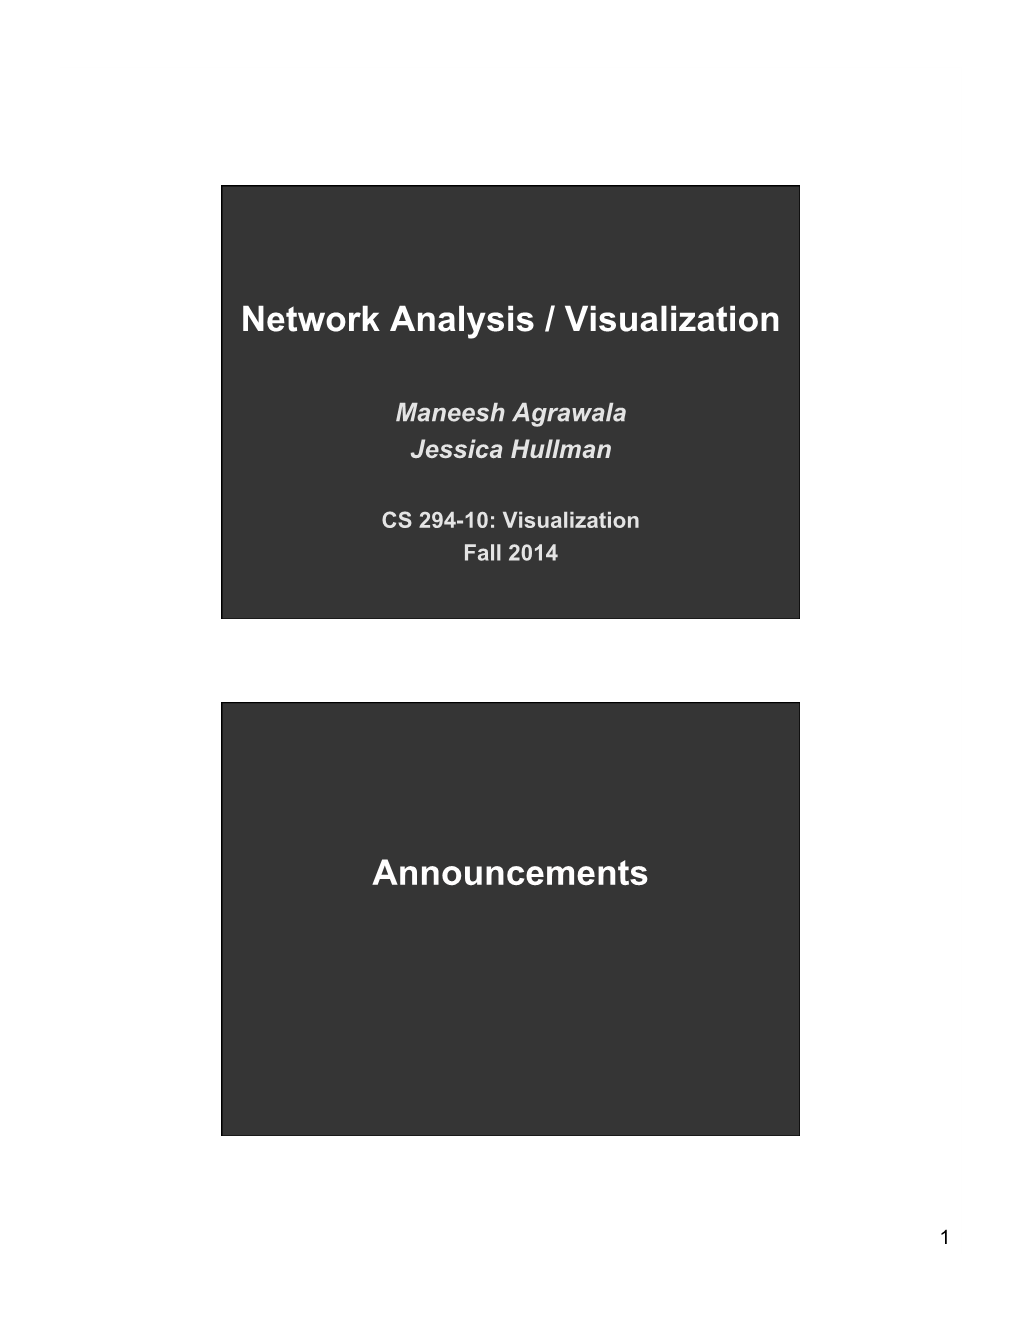 Network Analysis / Visualization Announcements